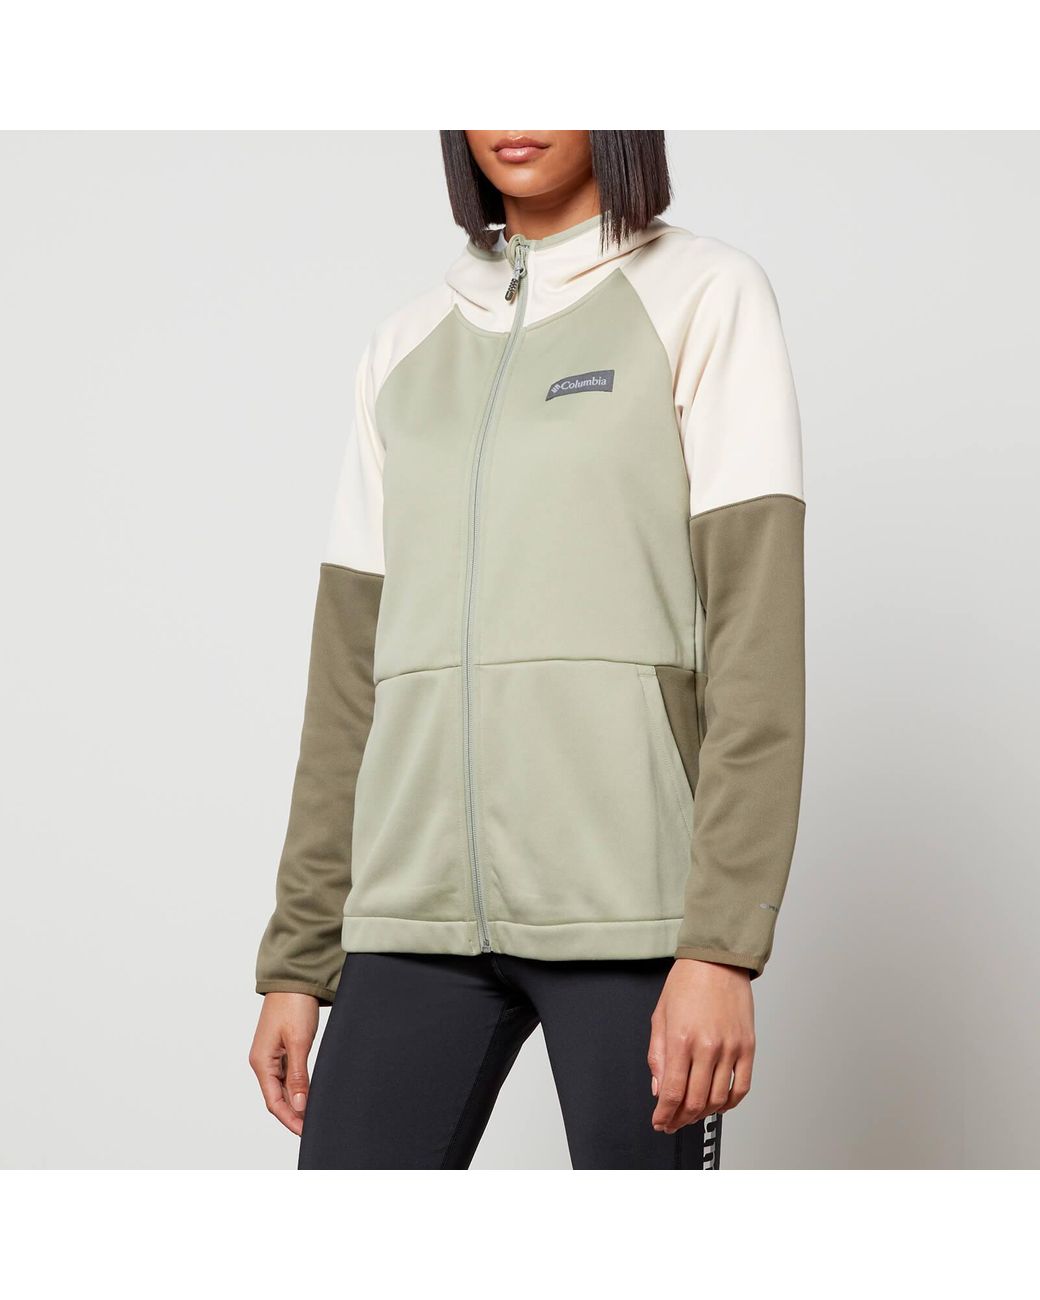 Columbia Windgates Fz Jacket in Natural